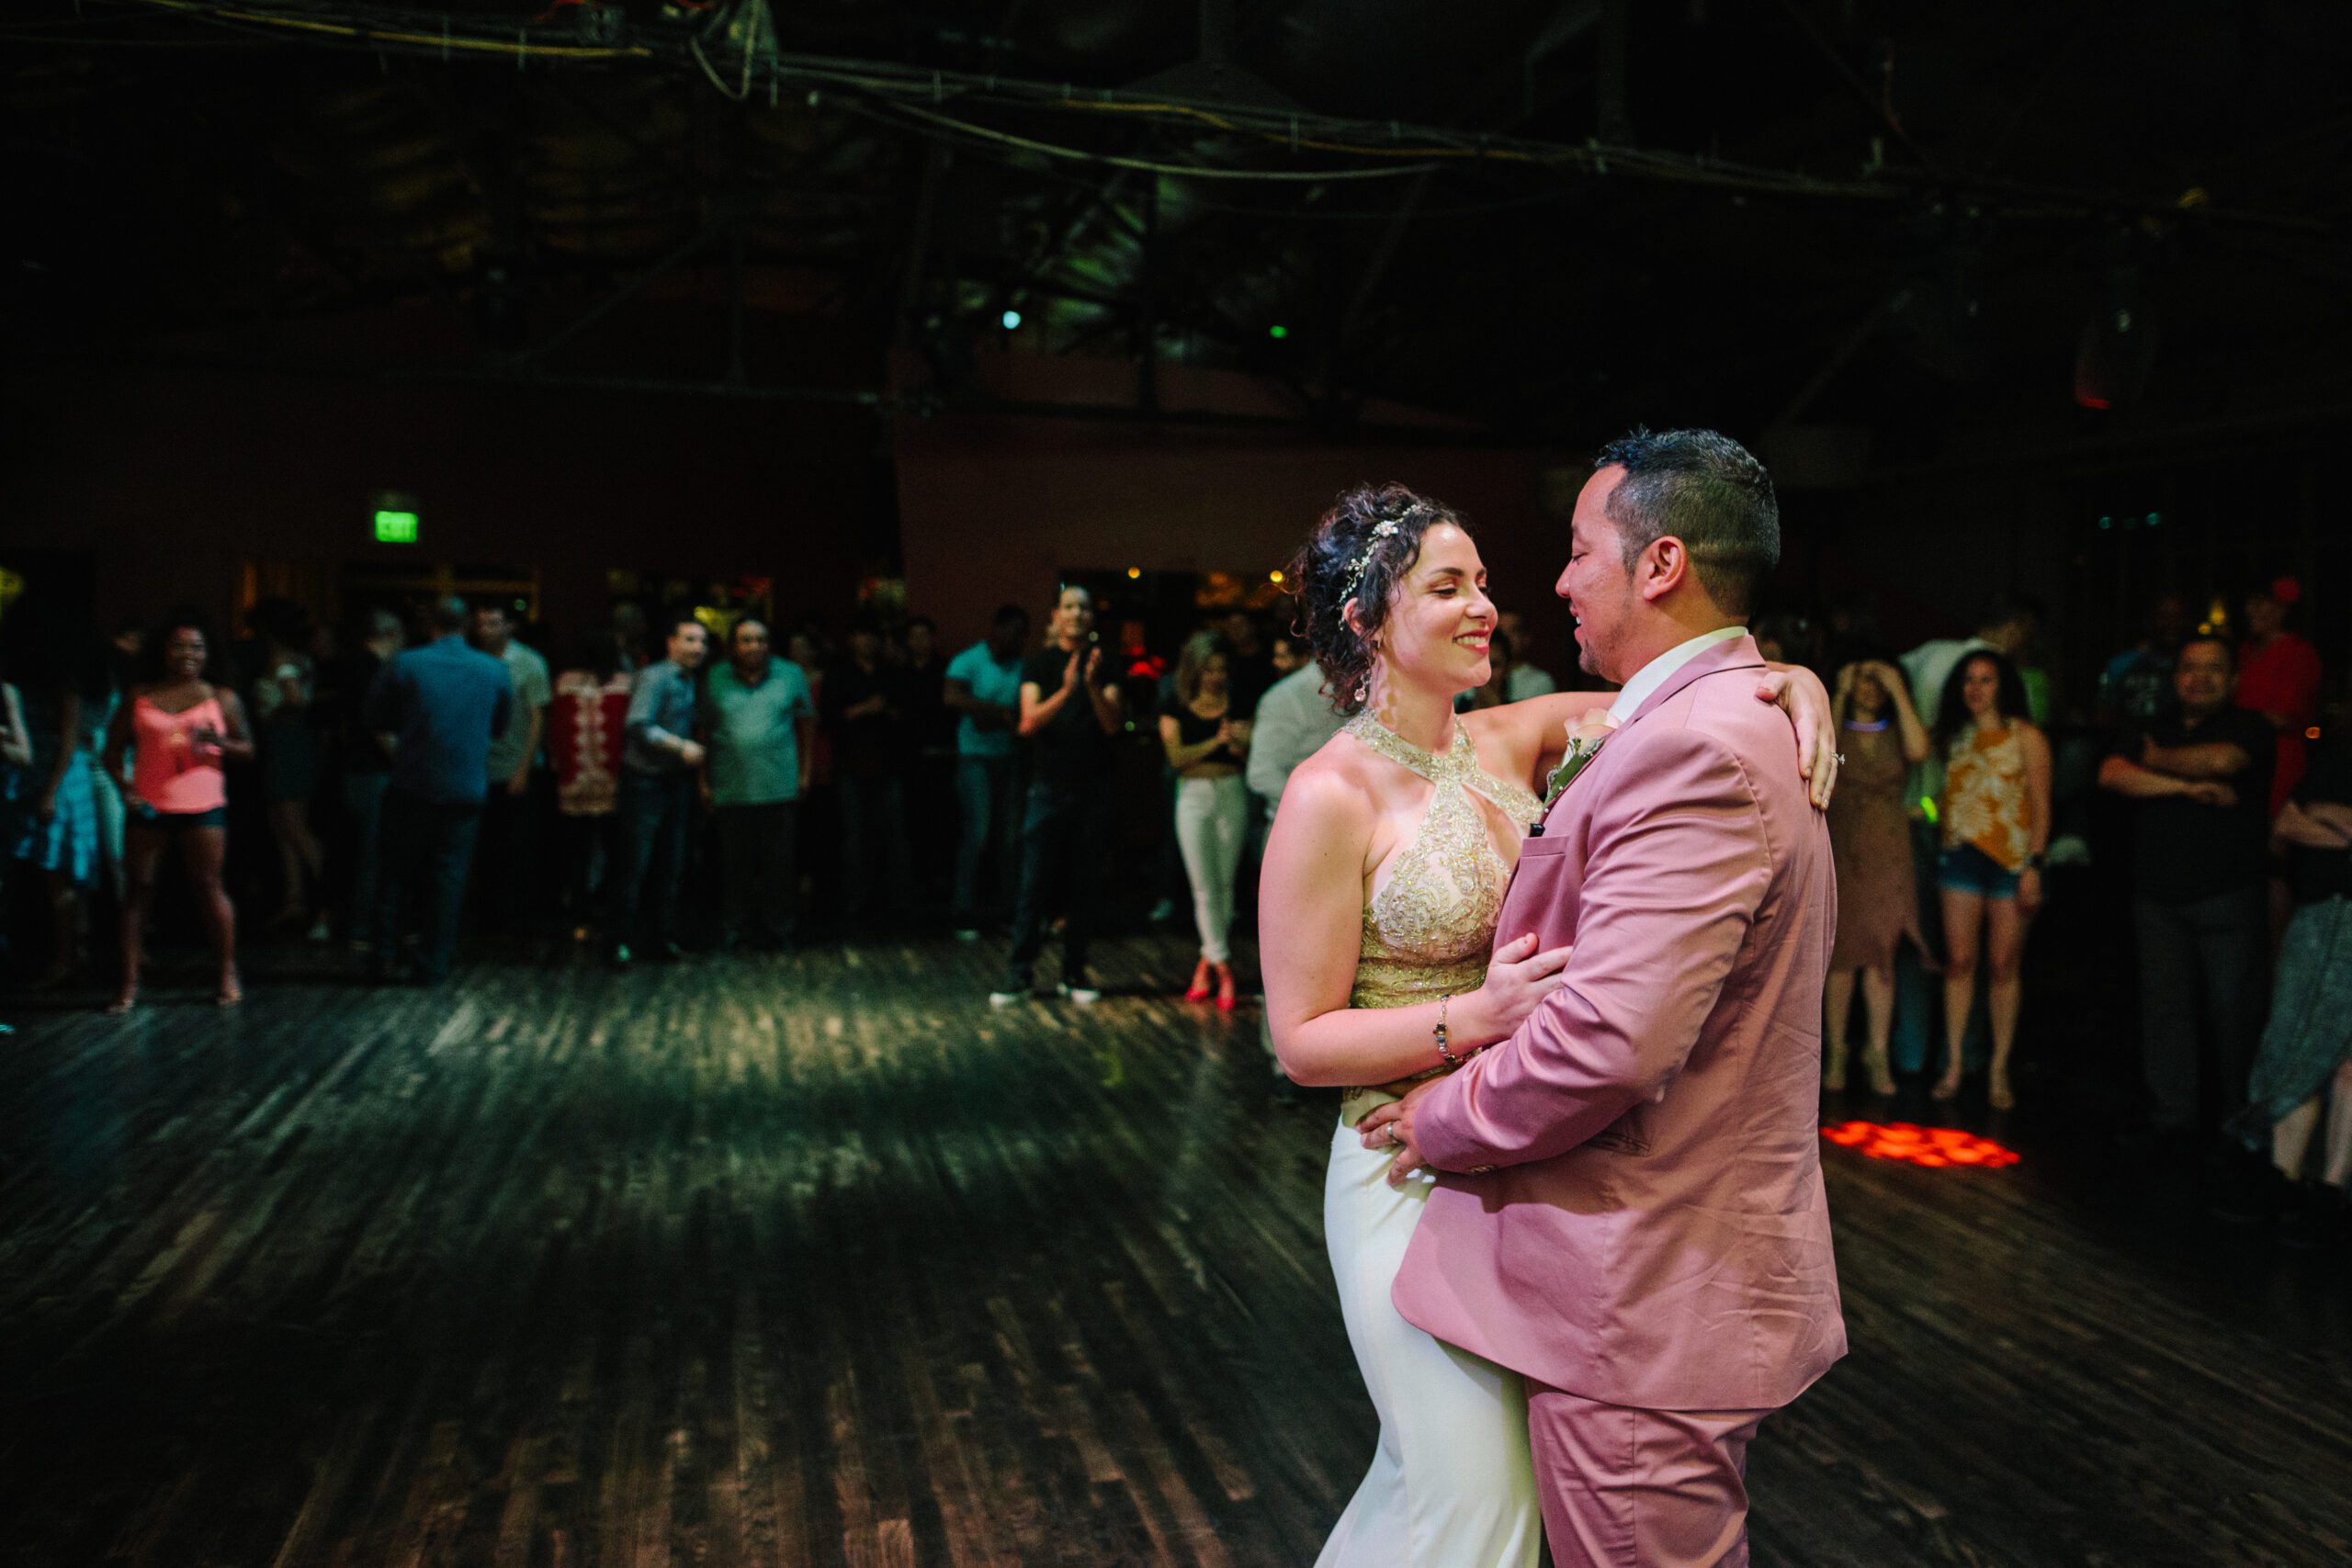 The bride and Groom dancing after their Butterfly Pavilion Wedding, the same place they met La Rumba Latin dance club. They are smiling at each other while their guests watch in awe behind them. 